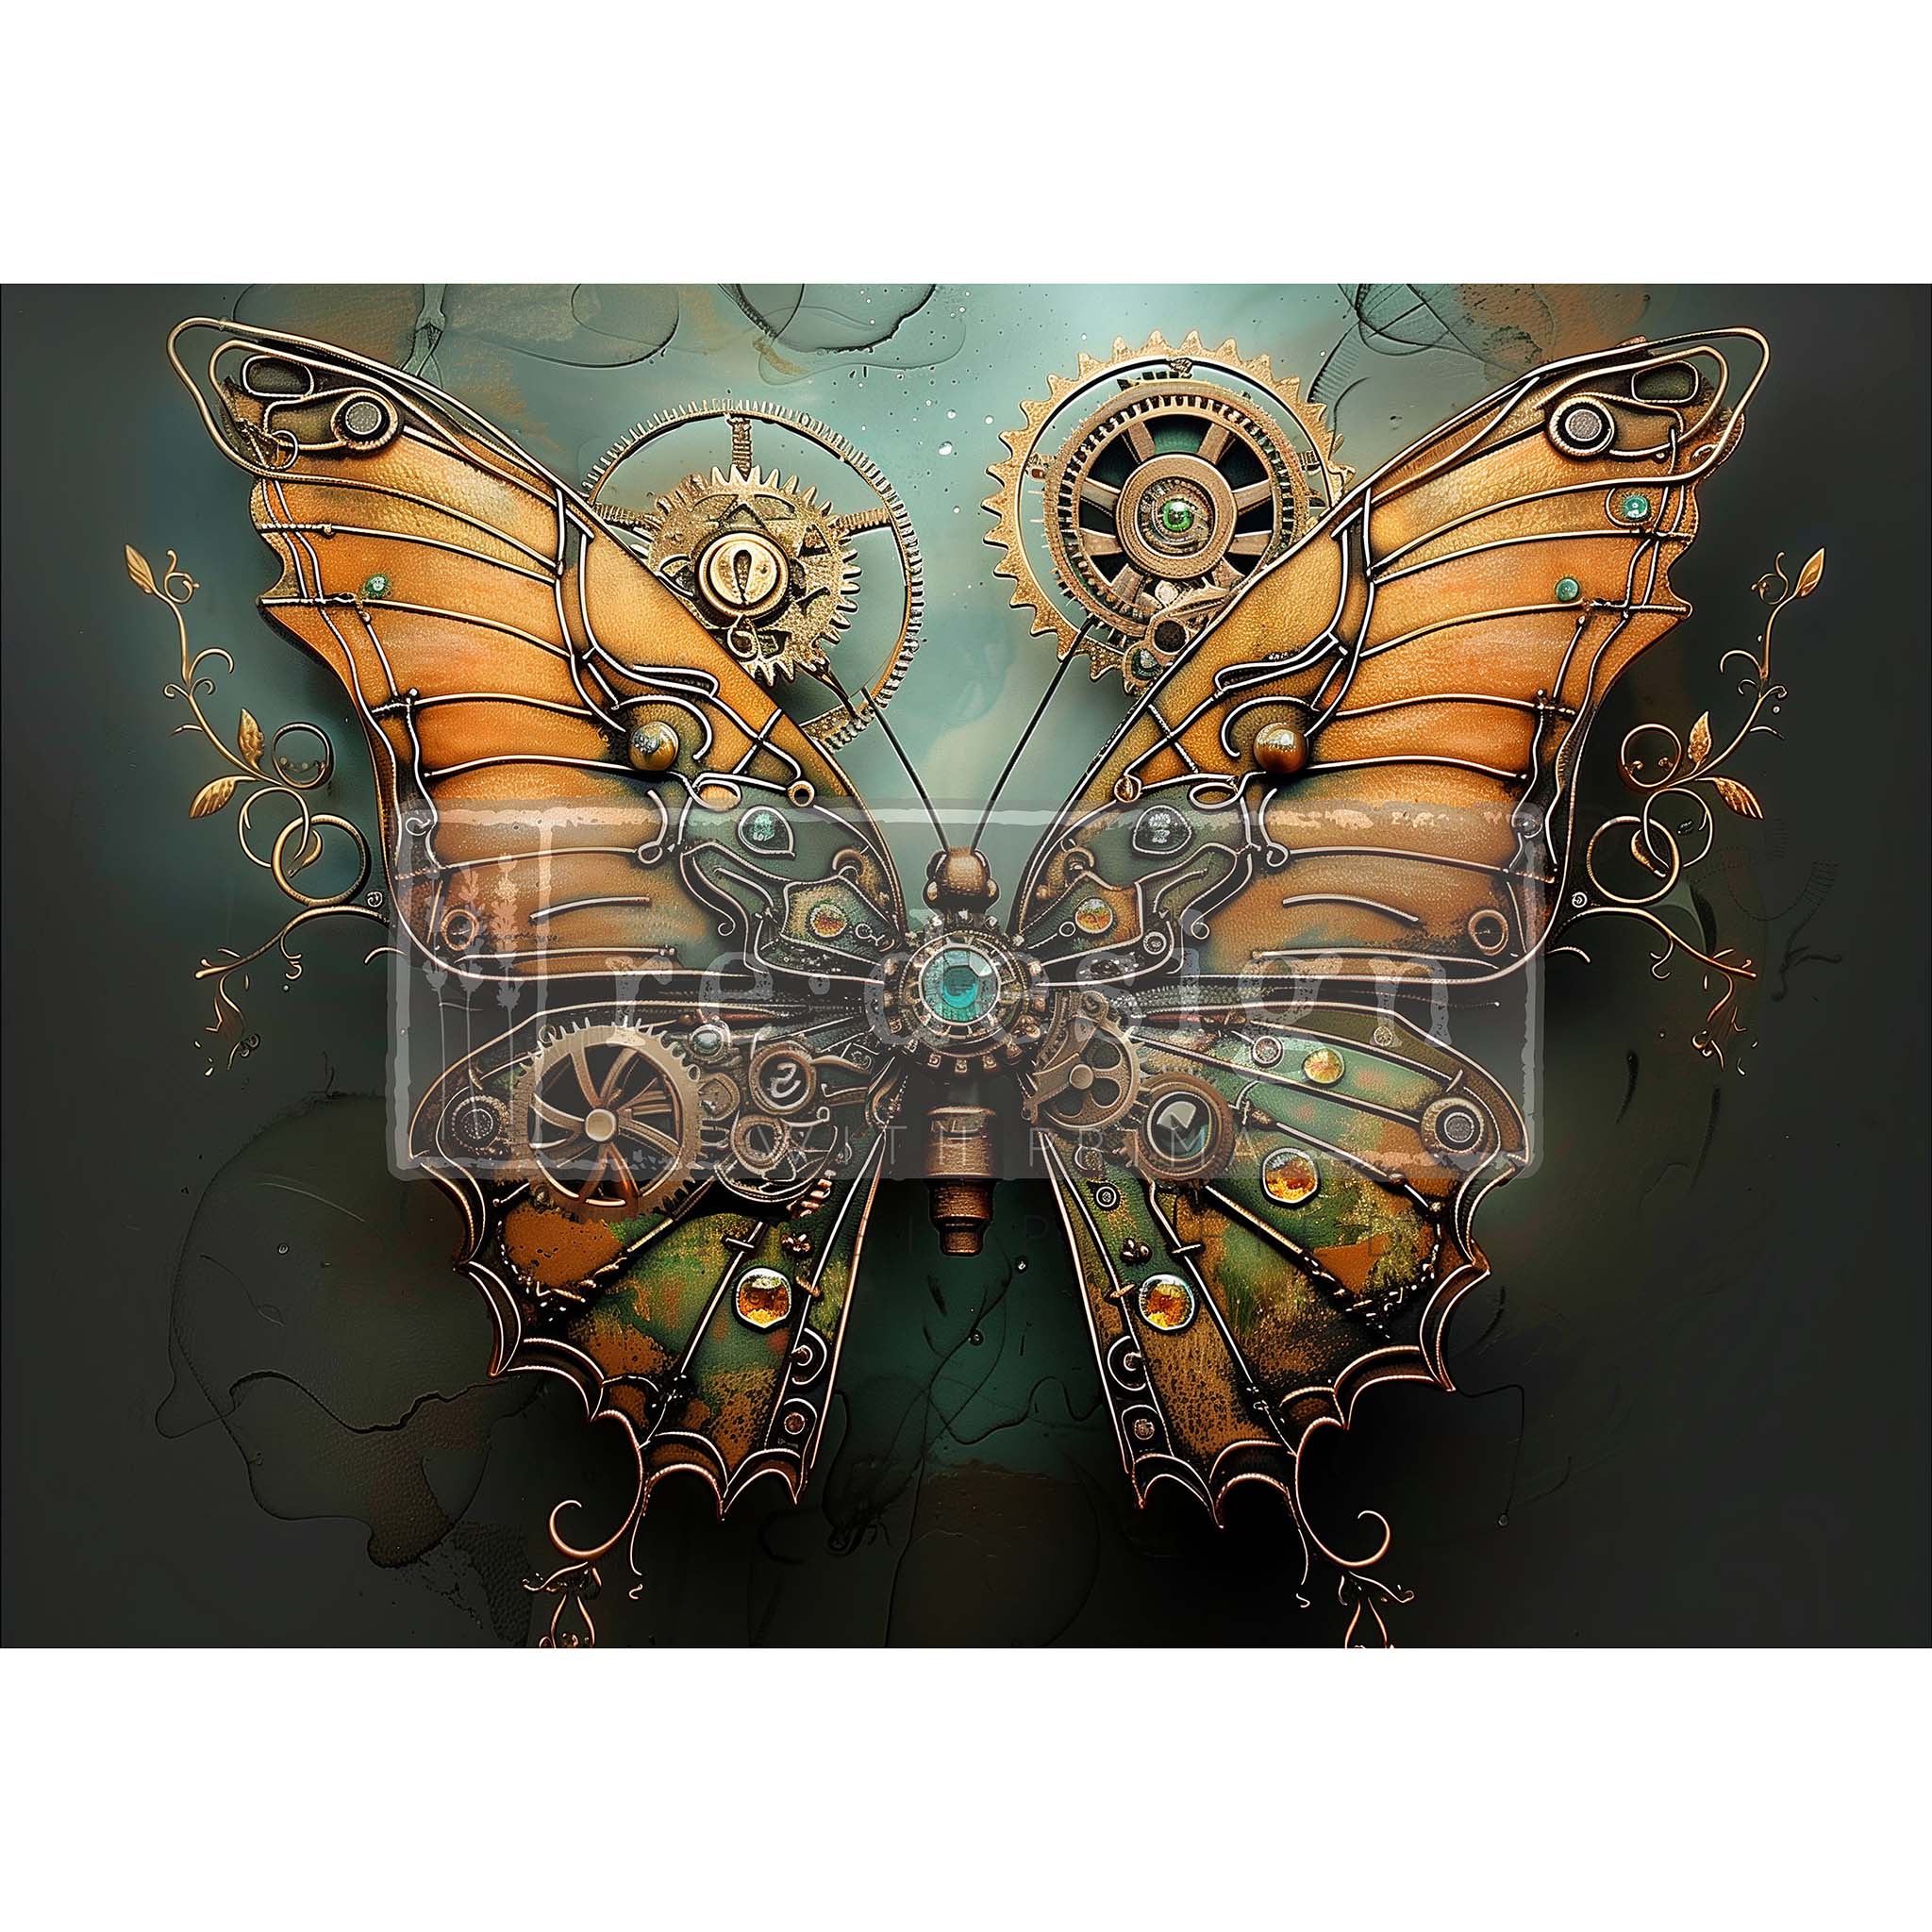 A1 fiber paper design featuring a steampunk butterfly with mechanical wings in front of gears and cogs against a soft blue green background. White borders are on the top and bottom.